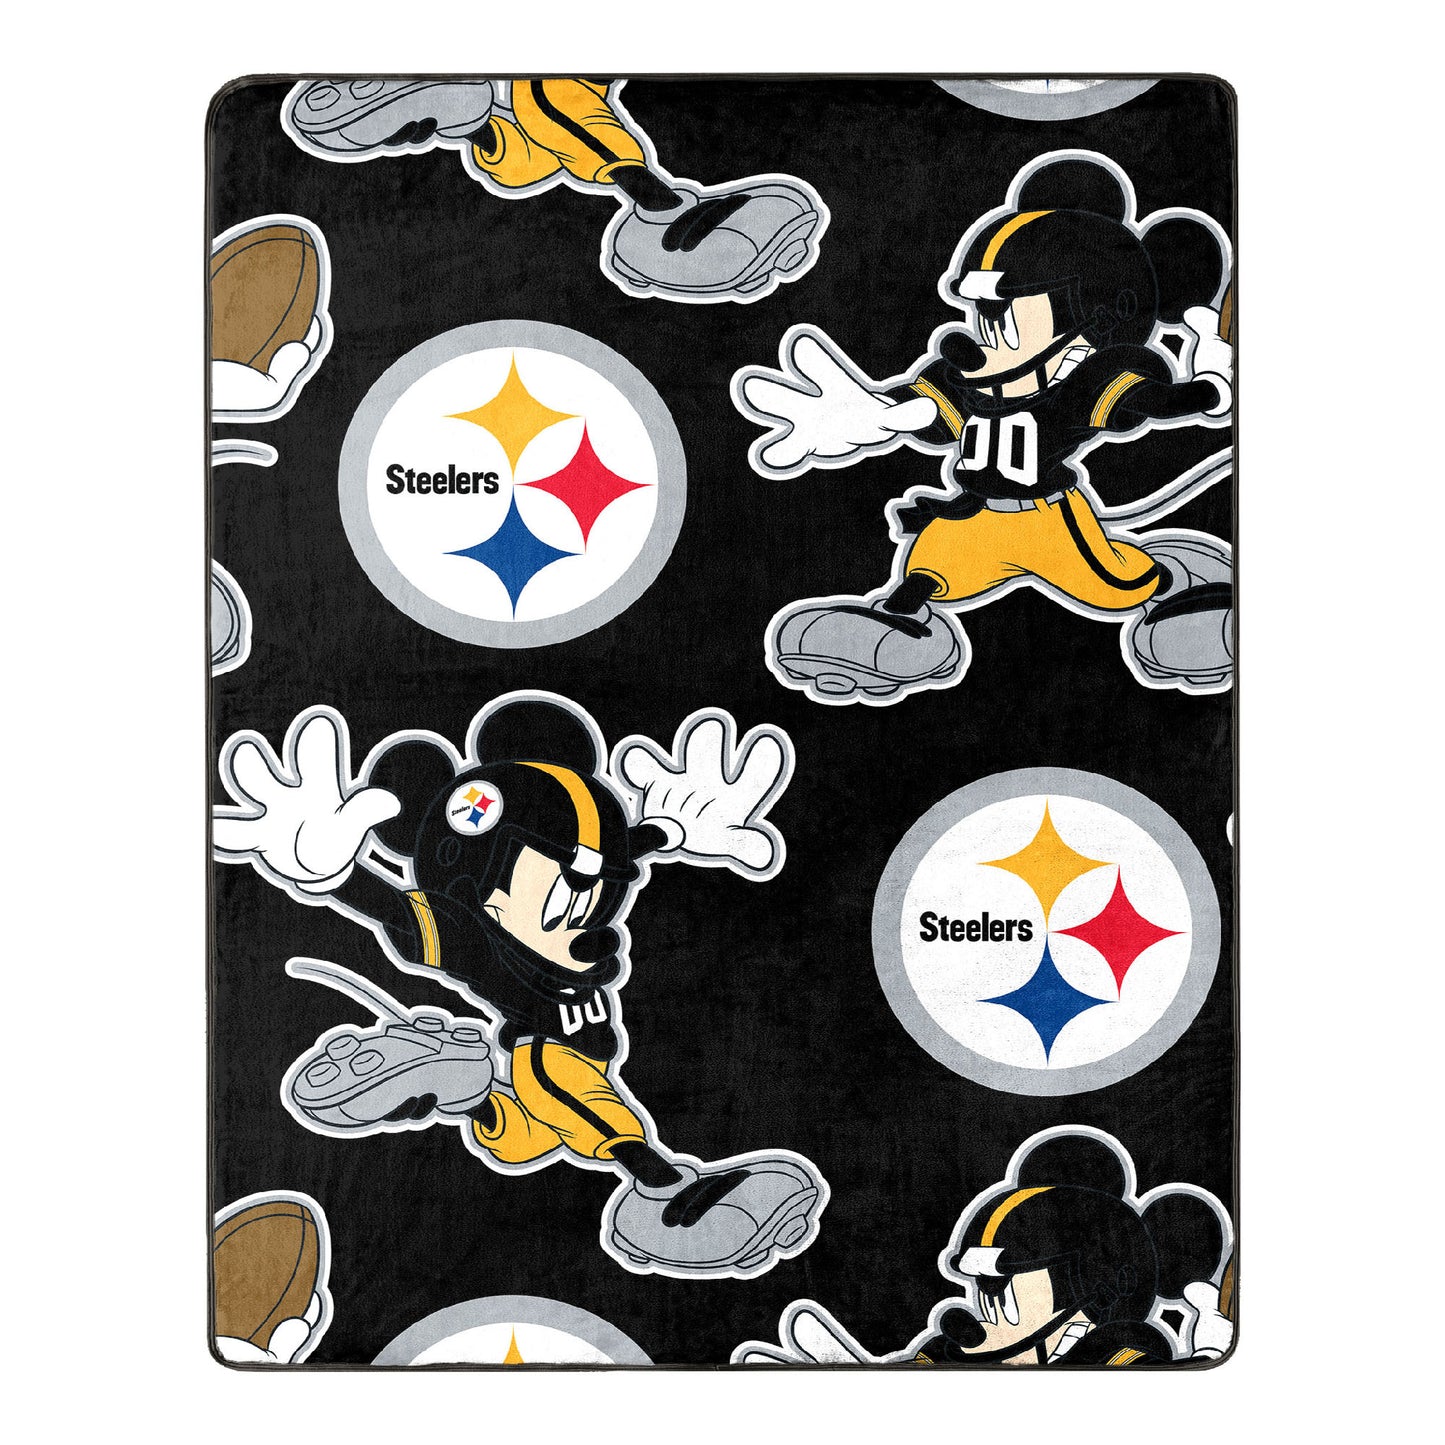 Steelers OFFICIAL NFL & Disney's Mickey Mouse Character Hugger Pillow & Silk Touch Throw Set;  40" x 50"